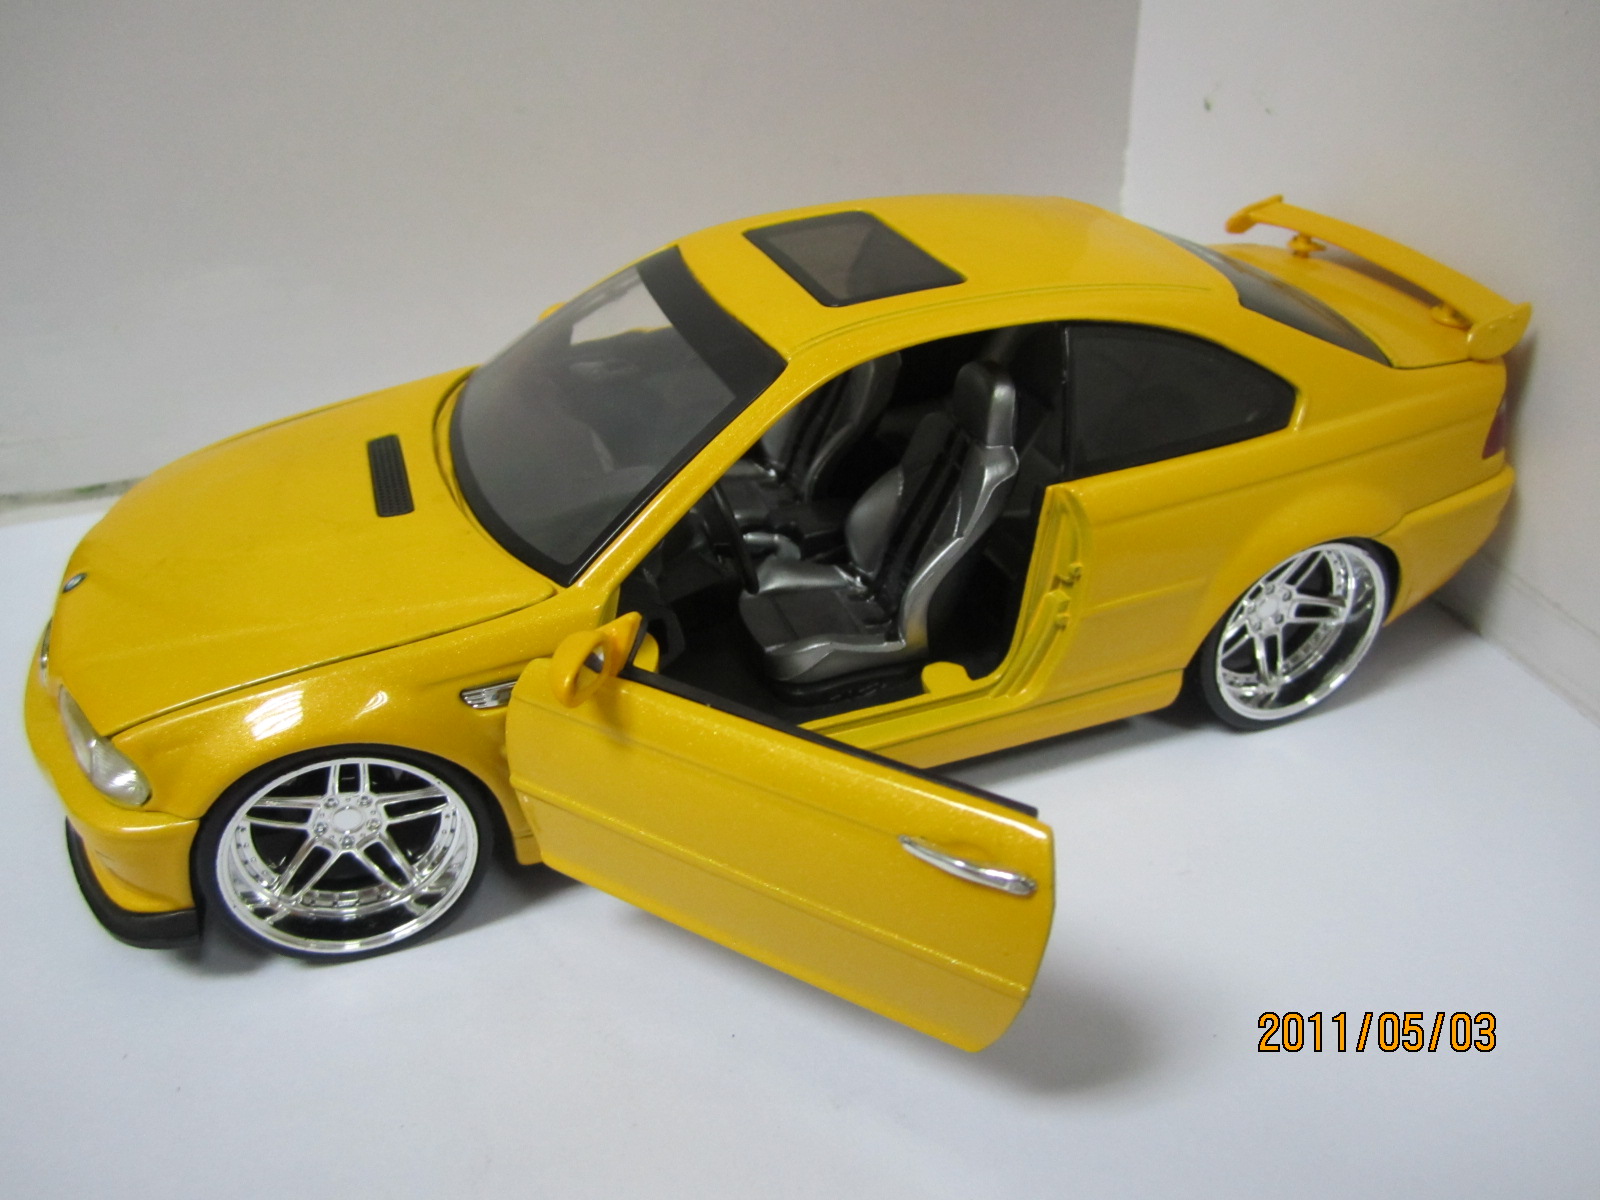 Alloy Handmade Die Cast Collectible Car Model